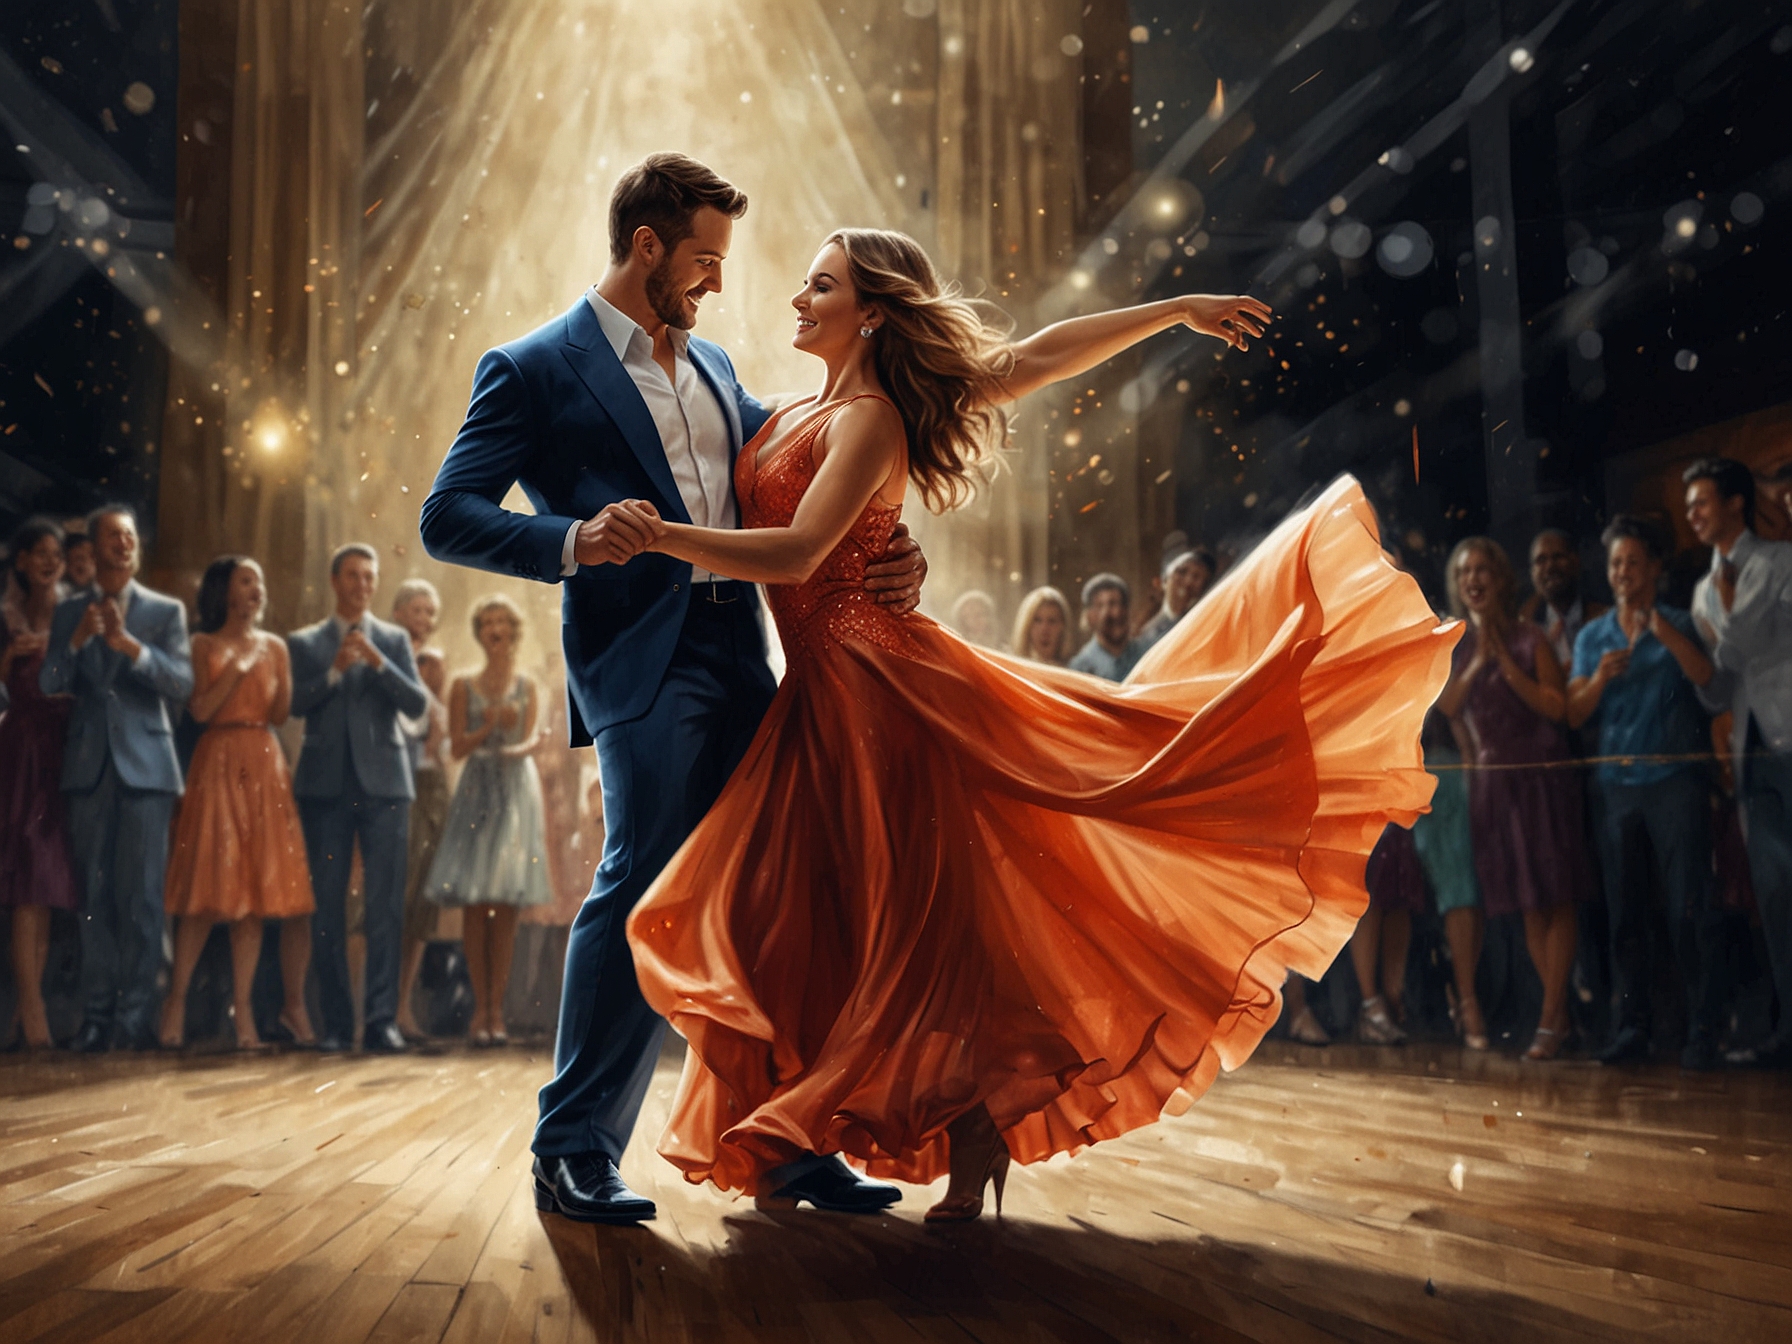 A dynamic image showcasing the contestant participating in a charity dance event, highlighting their rhythm and dance skills which fans hope will secure them a spot on DWTS.